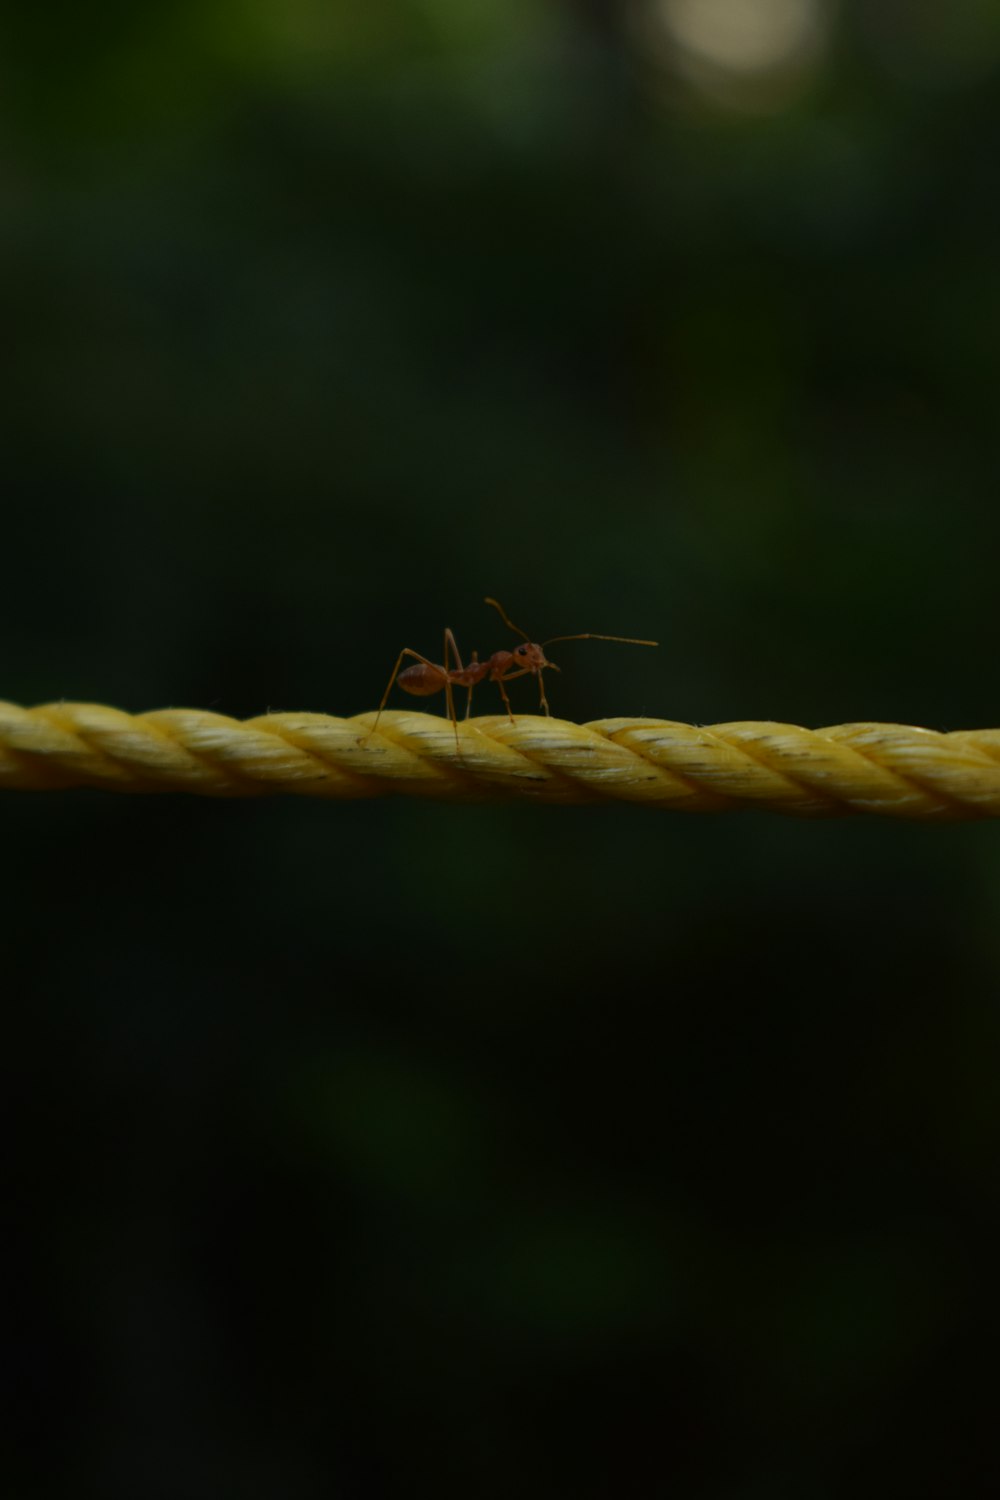 red ant on rope